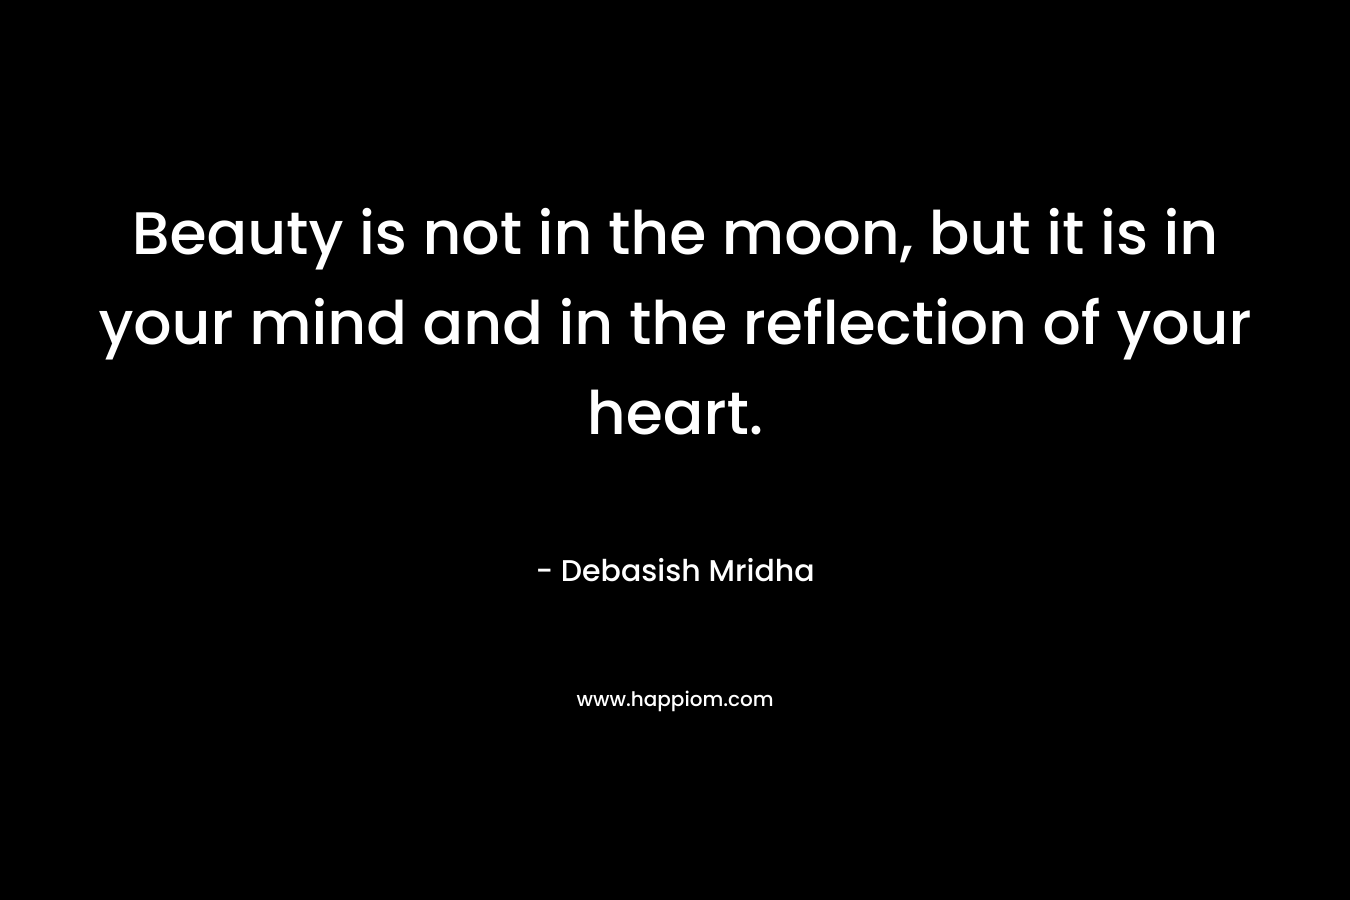 Beauty is not in the moon, but it is in your mind and in the reflection of your heart.